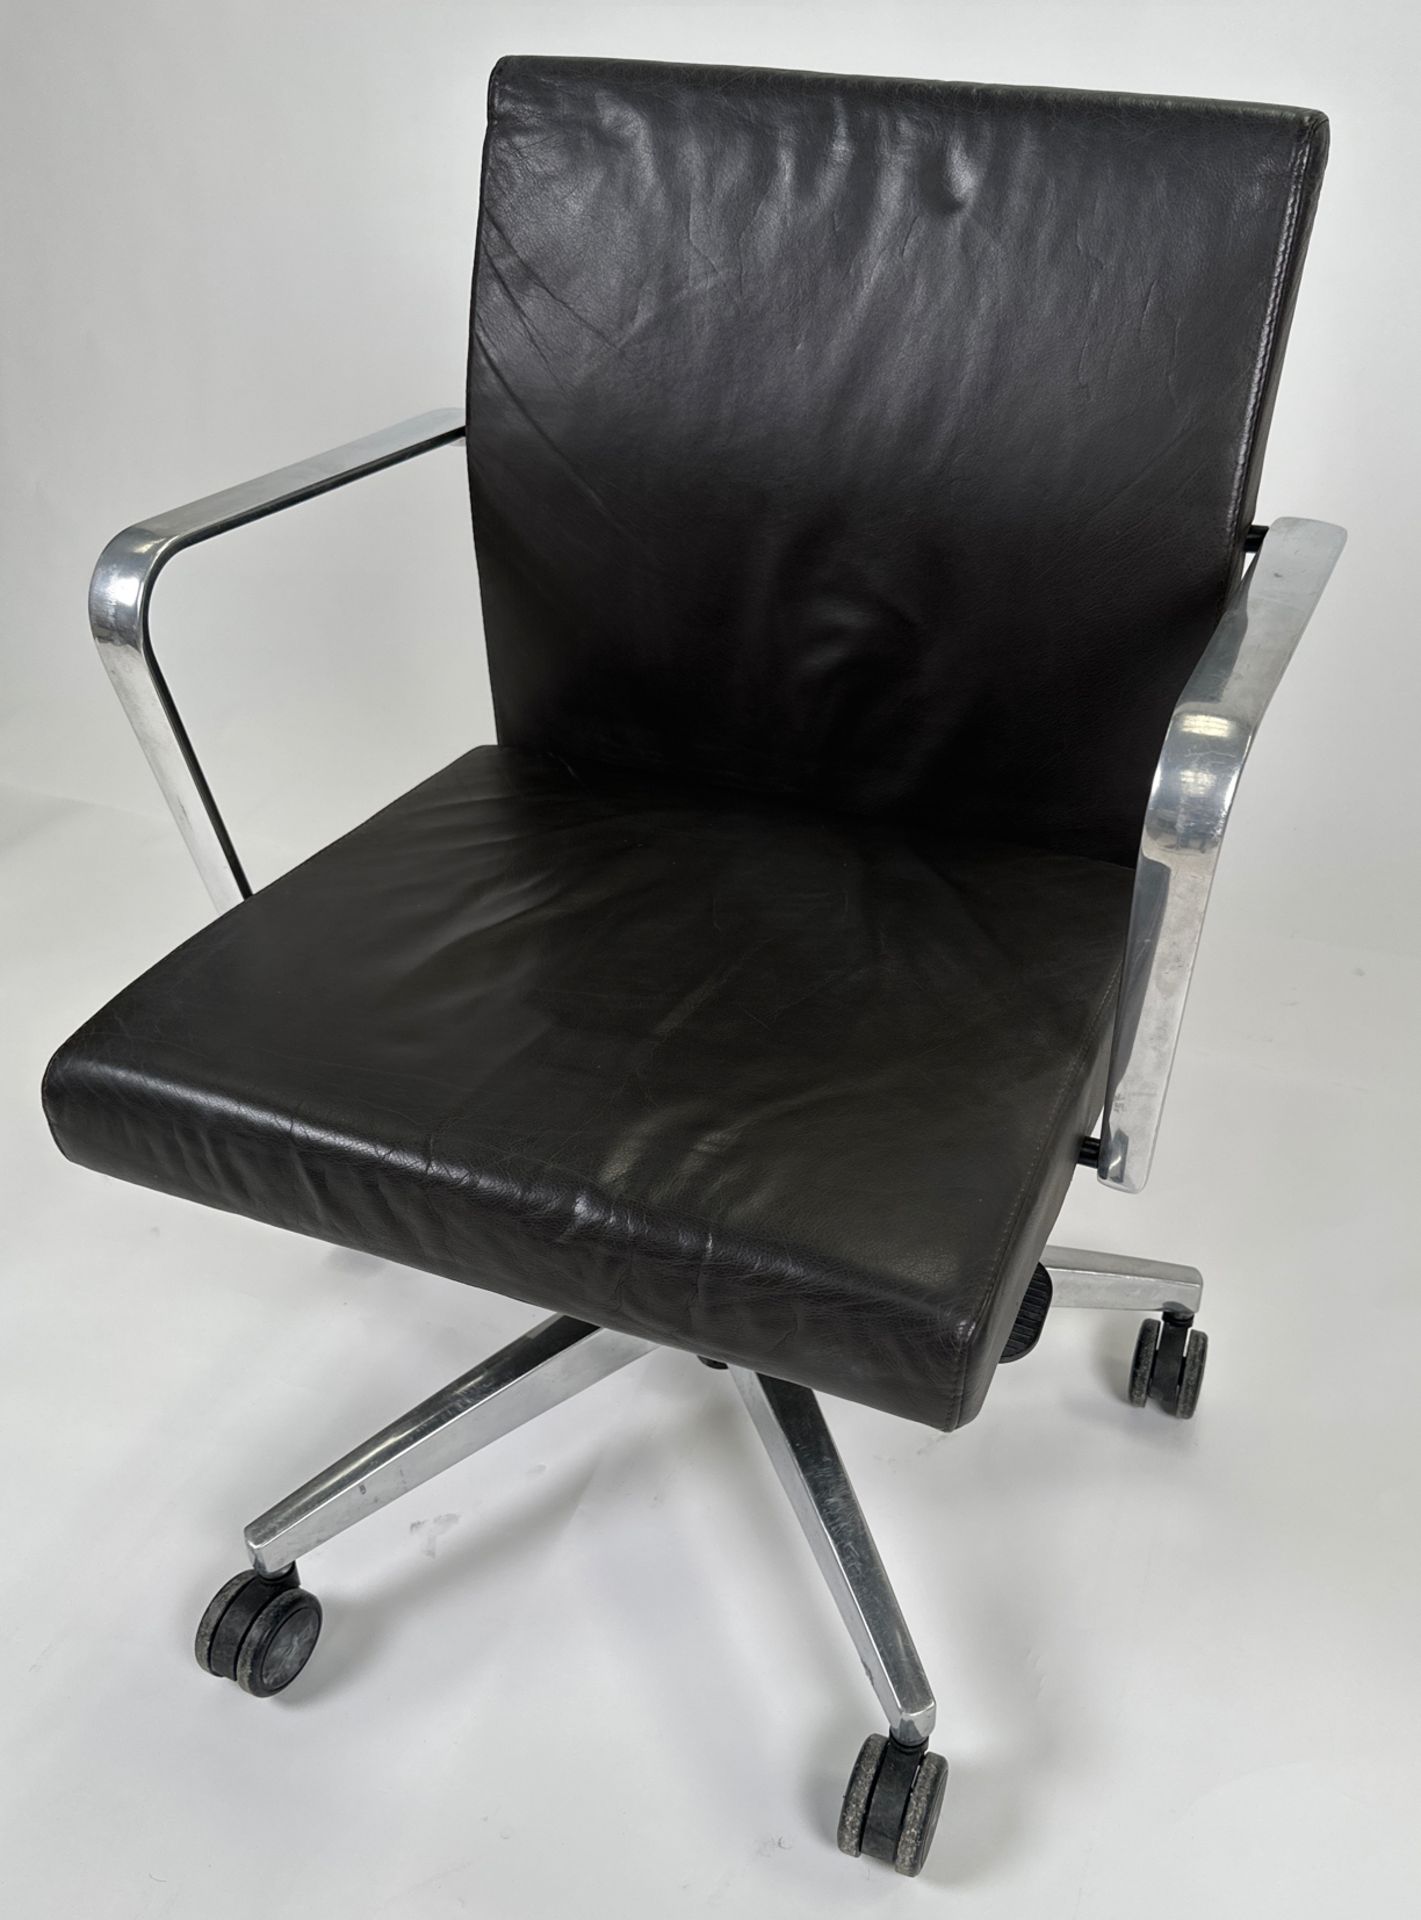 Keilhauer Adjustable Leather Office Chair - Image 3 of 3